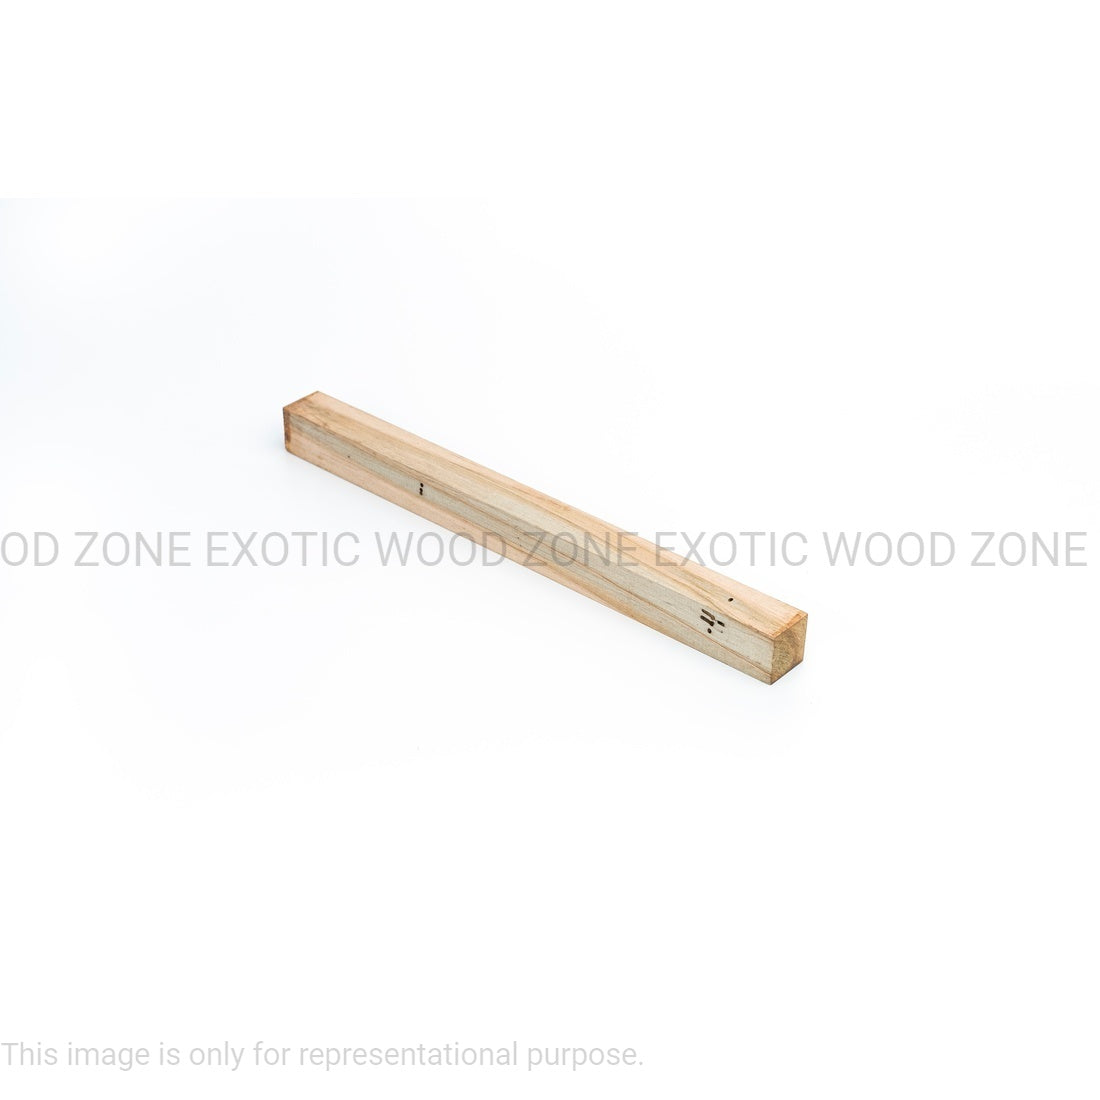 Ambrosia Maple Hobbywood Blank 1&quot; x 1 &quot; x 12&quot; inches Exotic Wood Zone